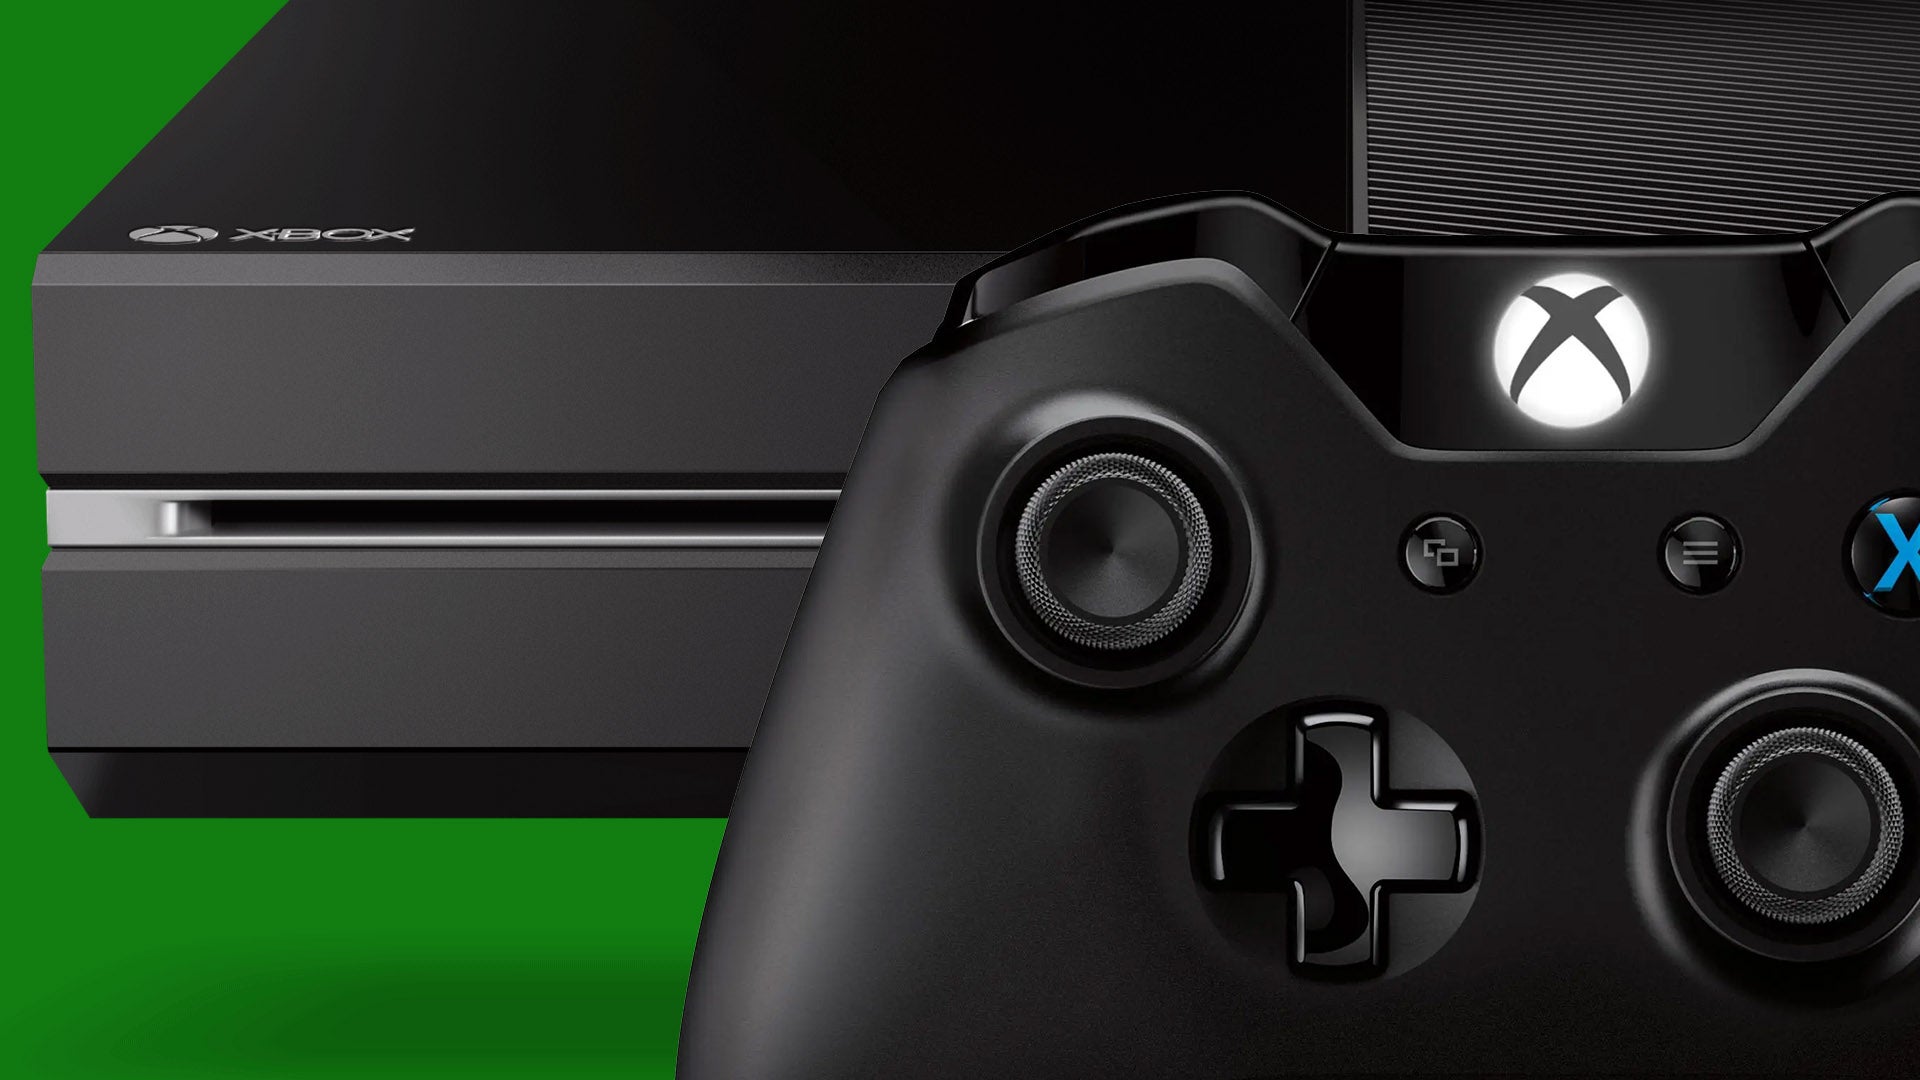 Image for The Original Xbox One Re-Tested: Can Microsoft's Weakest Console Keep Up With The Latest Games?